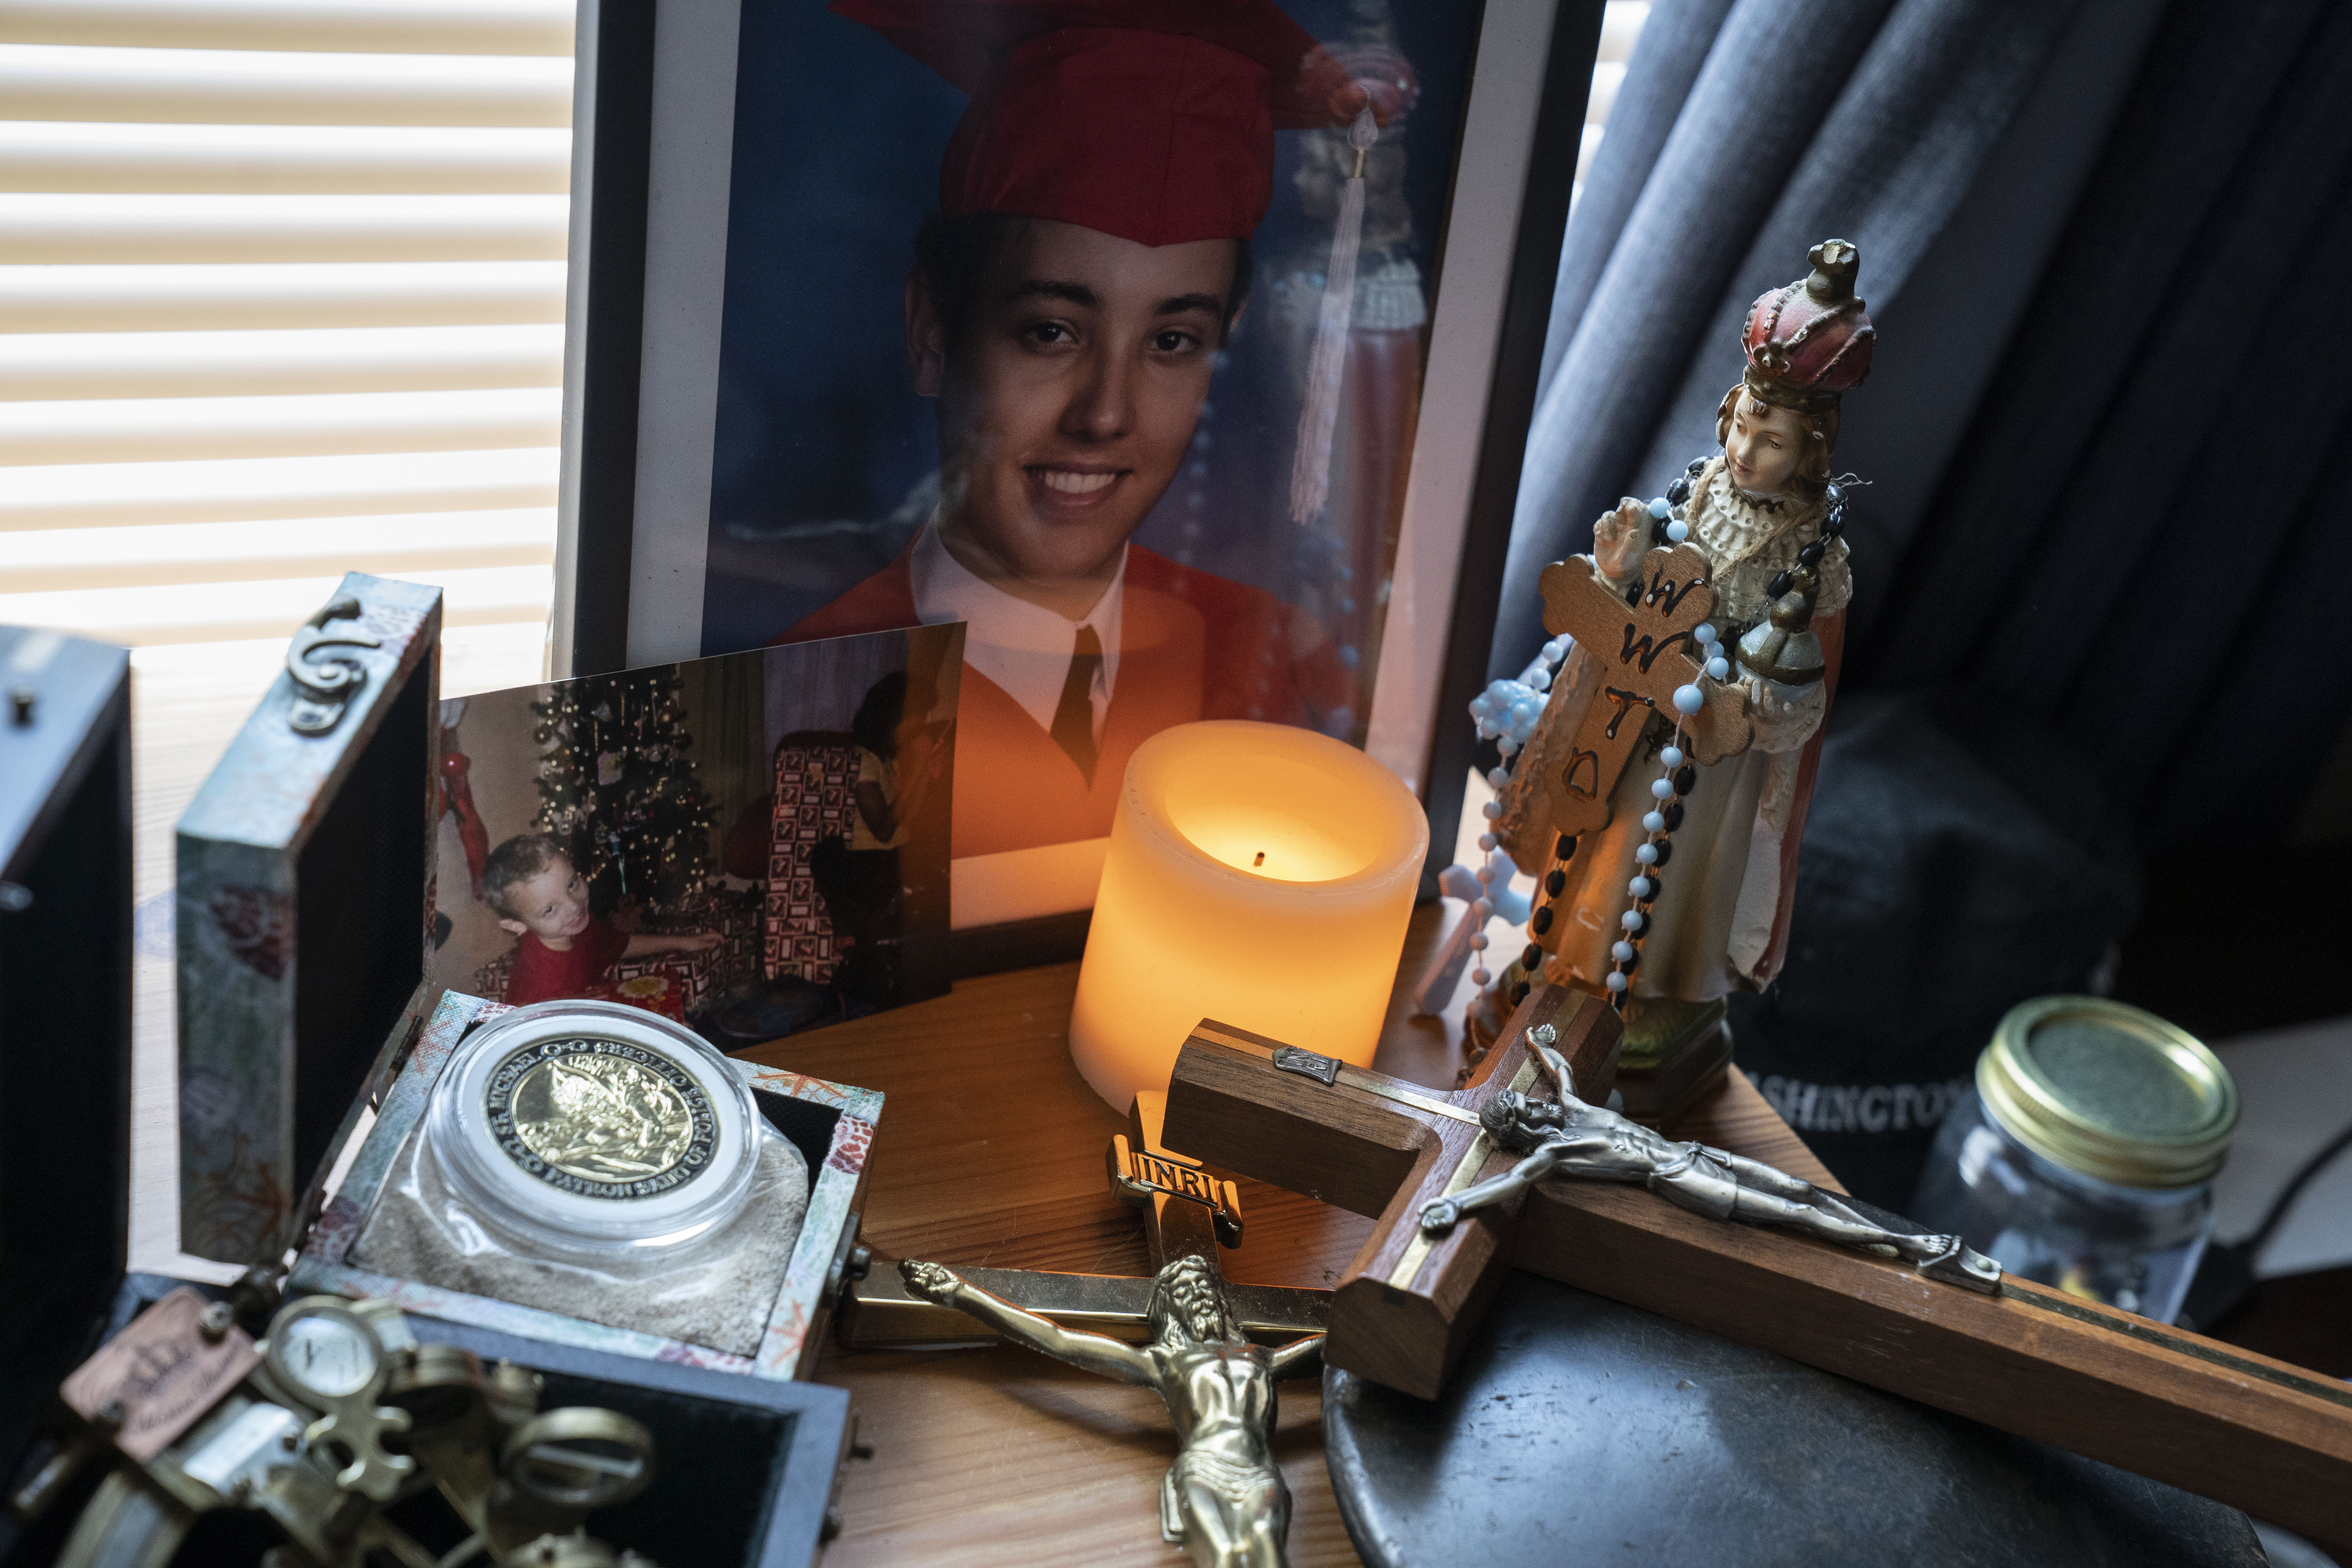 A senior high school portrait of Ty Sauer is among the items in his room in Union Beach, N.J., on June 10, 2022. Sauer, 18, was found dead in Shenandoah National Park in Virginia in April 2021. MUST CREDIT: Washington Post photo by Michael Robinson Chavez.